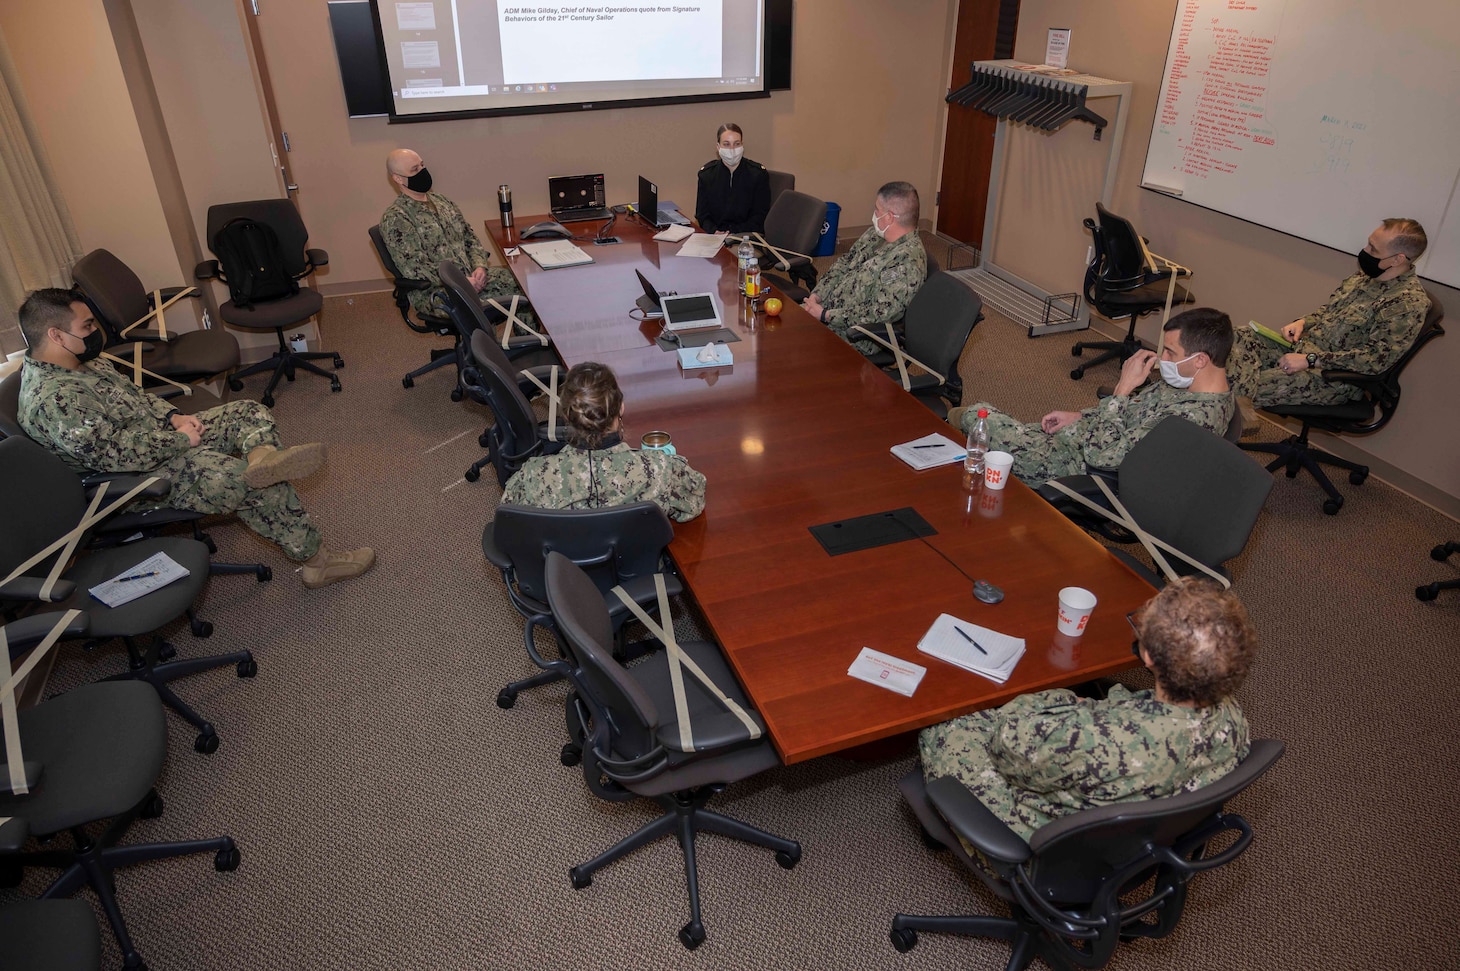 Sailors assigned to Commander, Navy Reserve Forces Command attend a socially distanced extremism stand-down discussion.